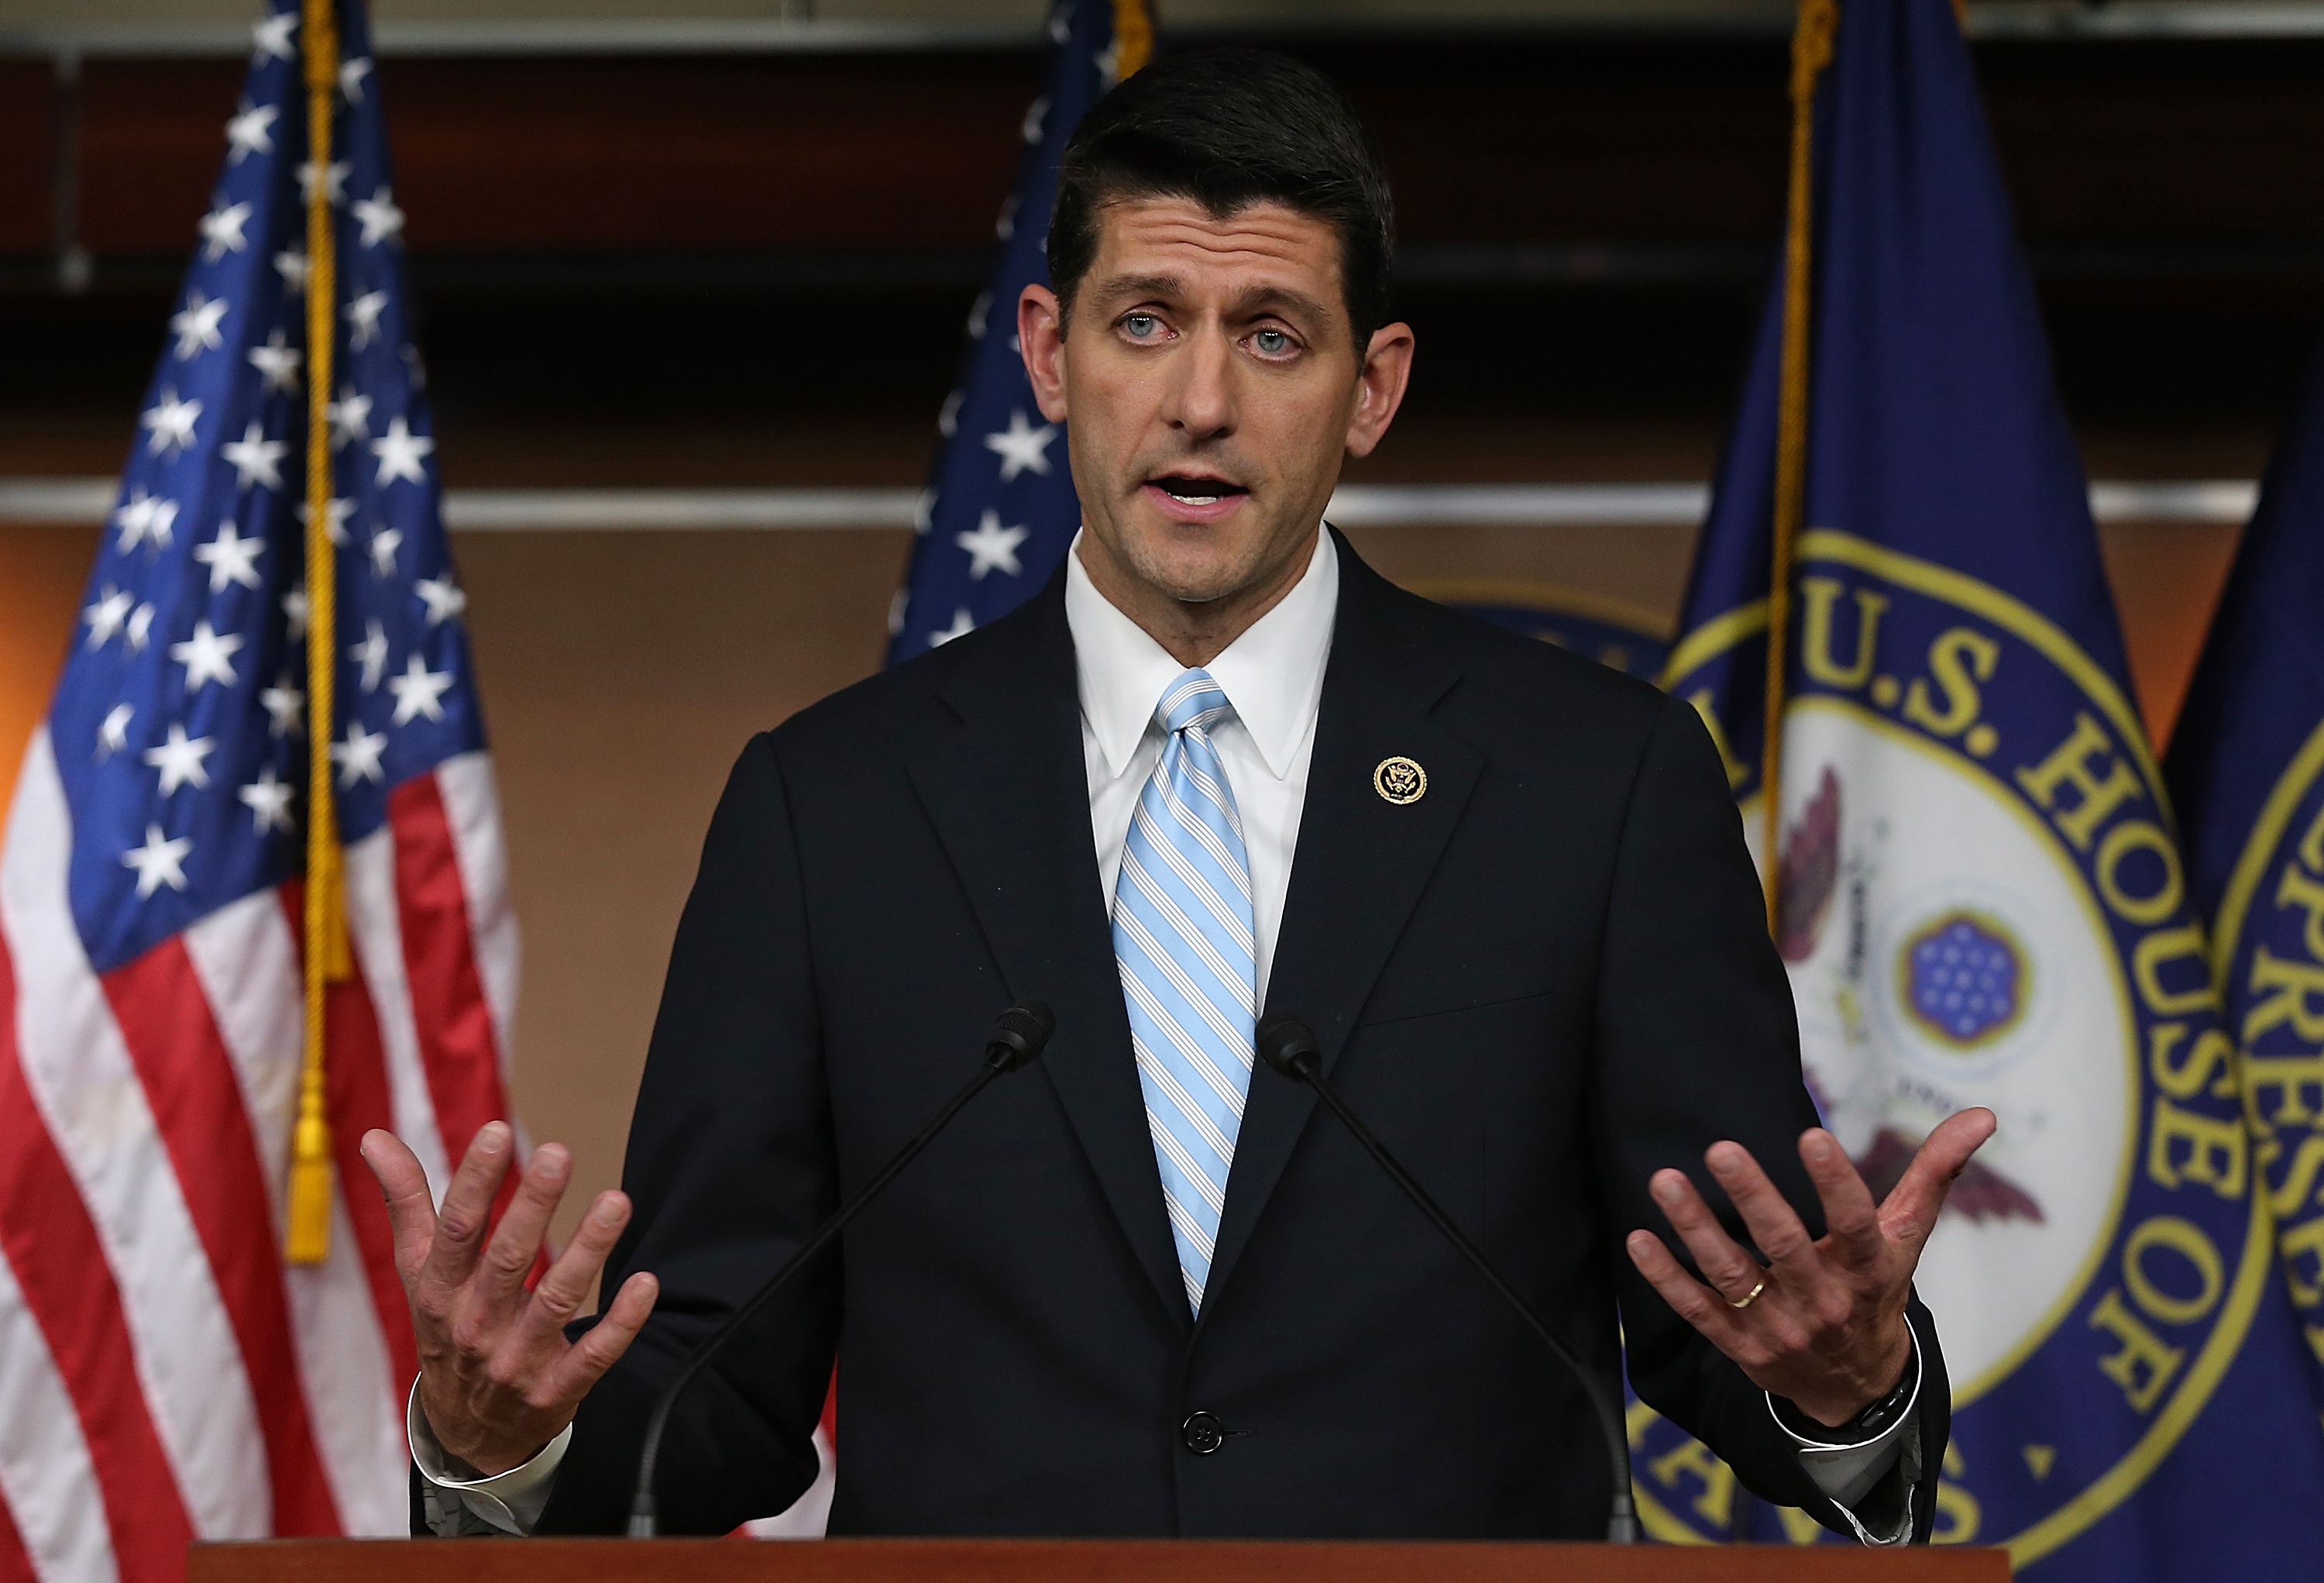 Paul Ryan speaks following a meeting of House Republicans at the U.S. Capitol on Oct. 20, 2015 in Washington, D.C. (Win McNamee—Getty Images)